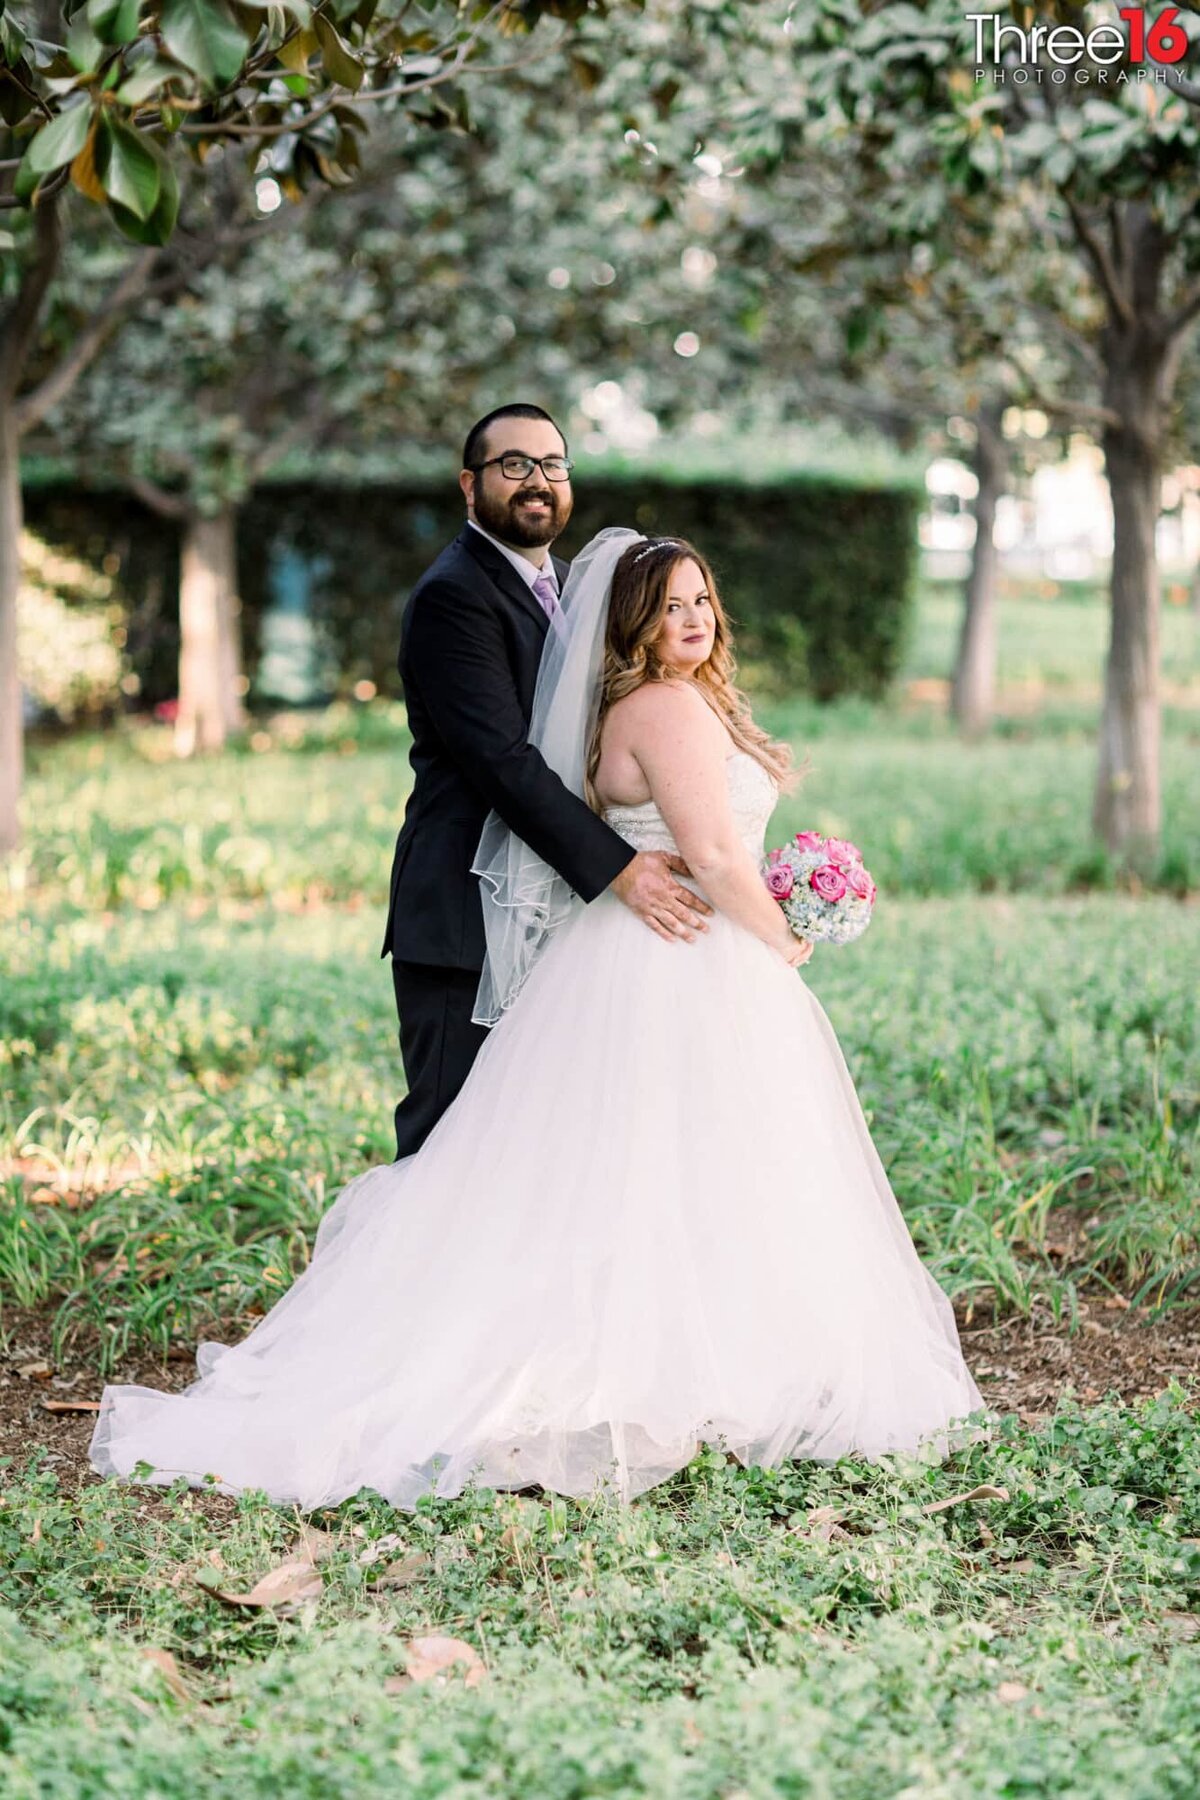 Groom poses up against his Bride from behind during their post wedding photo shoot